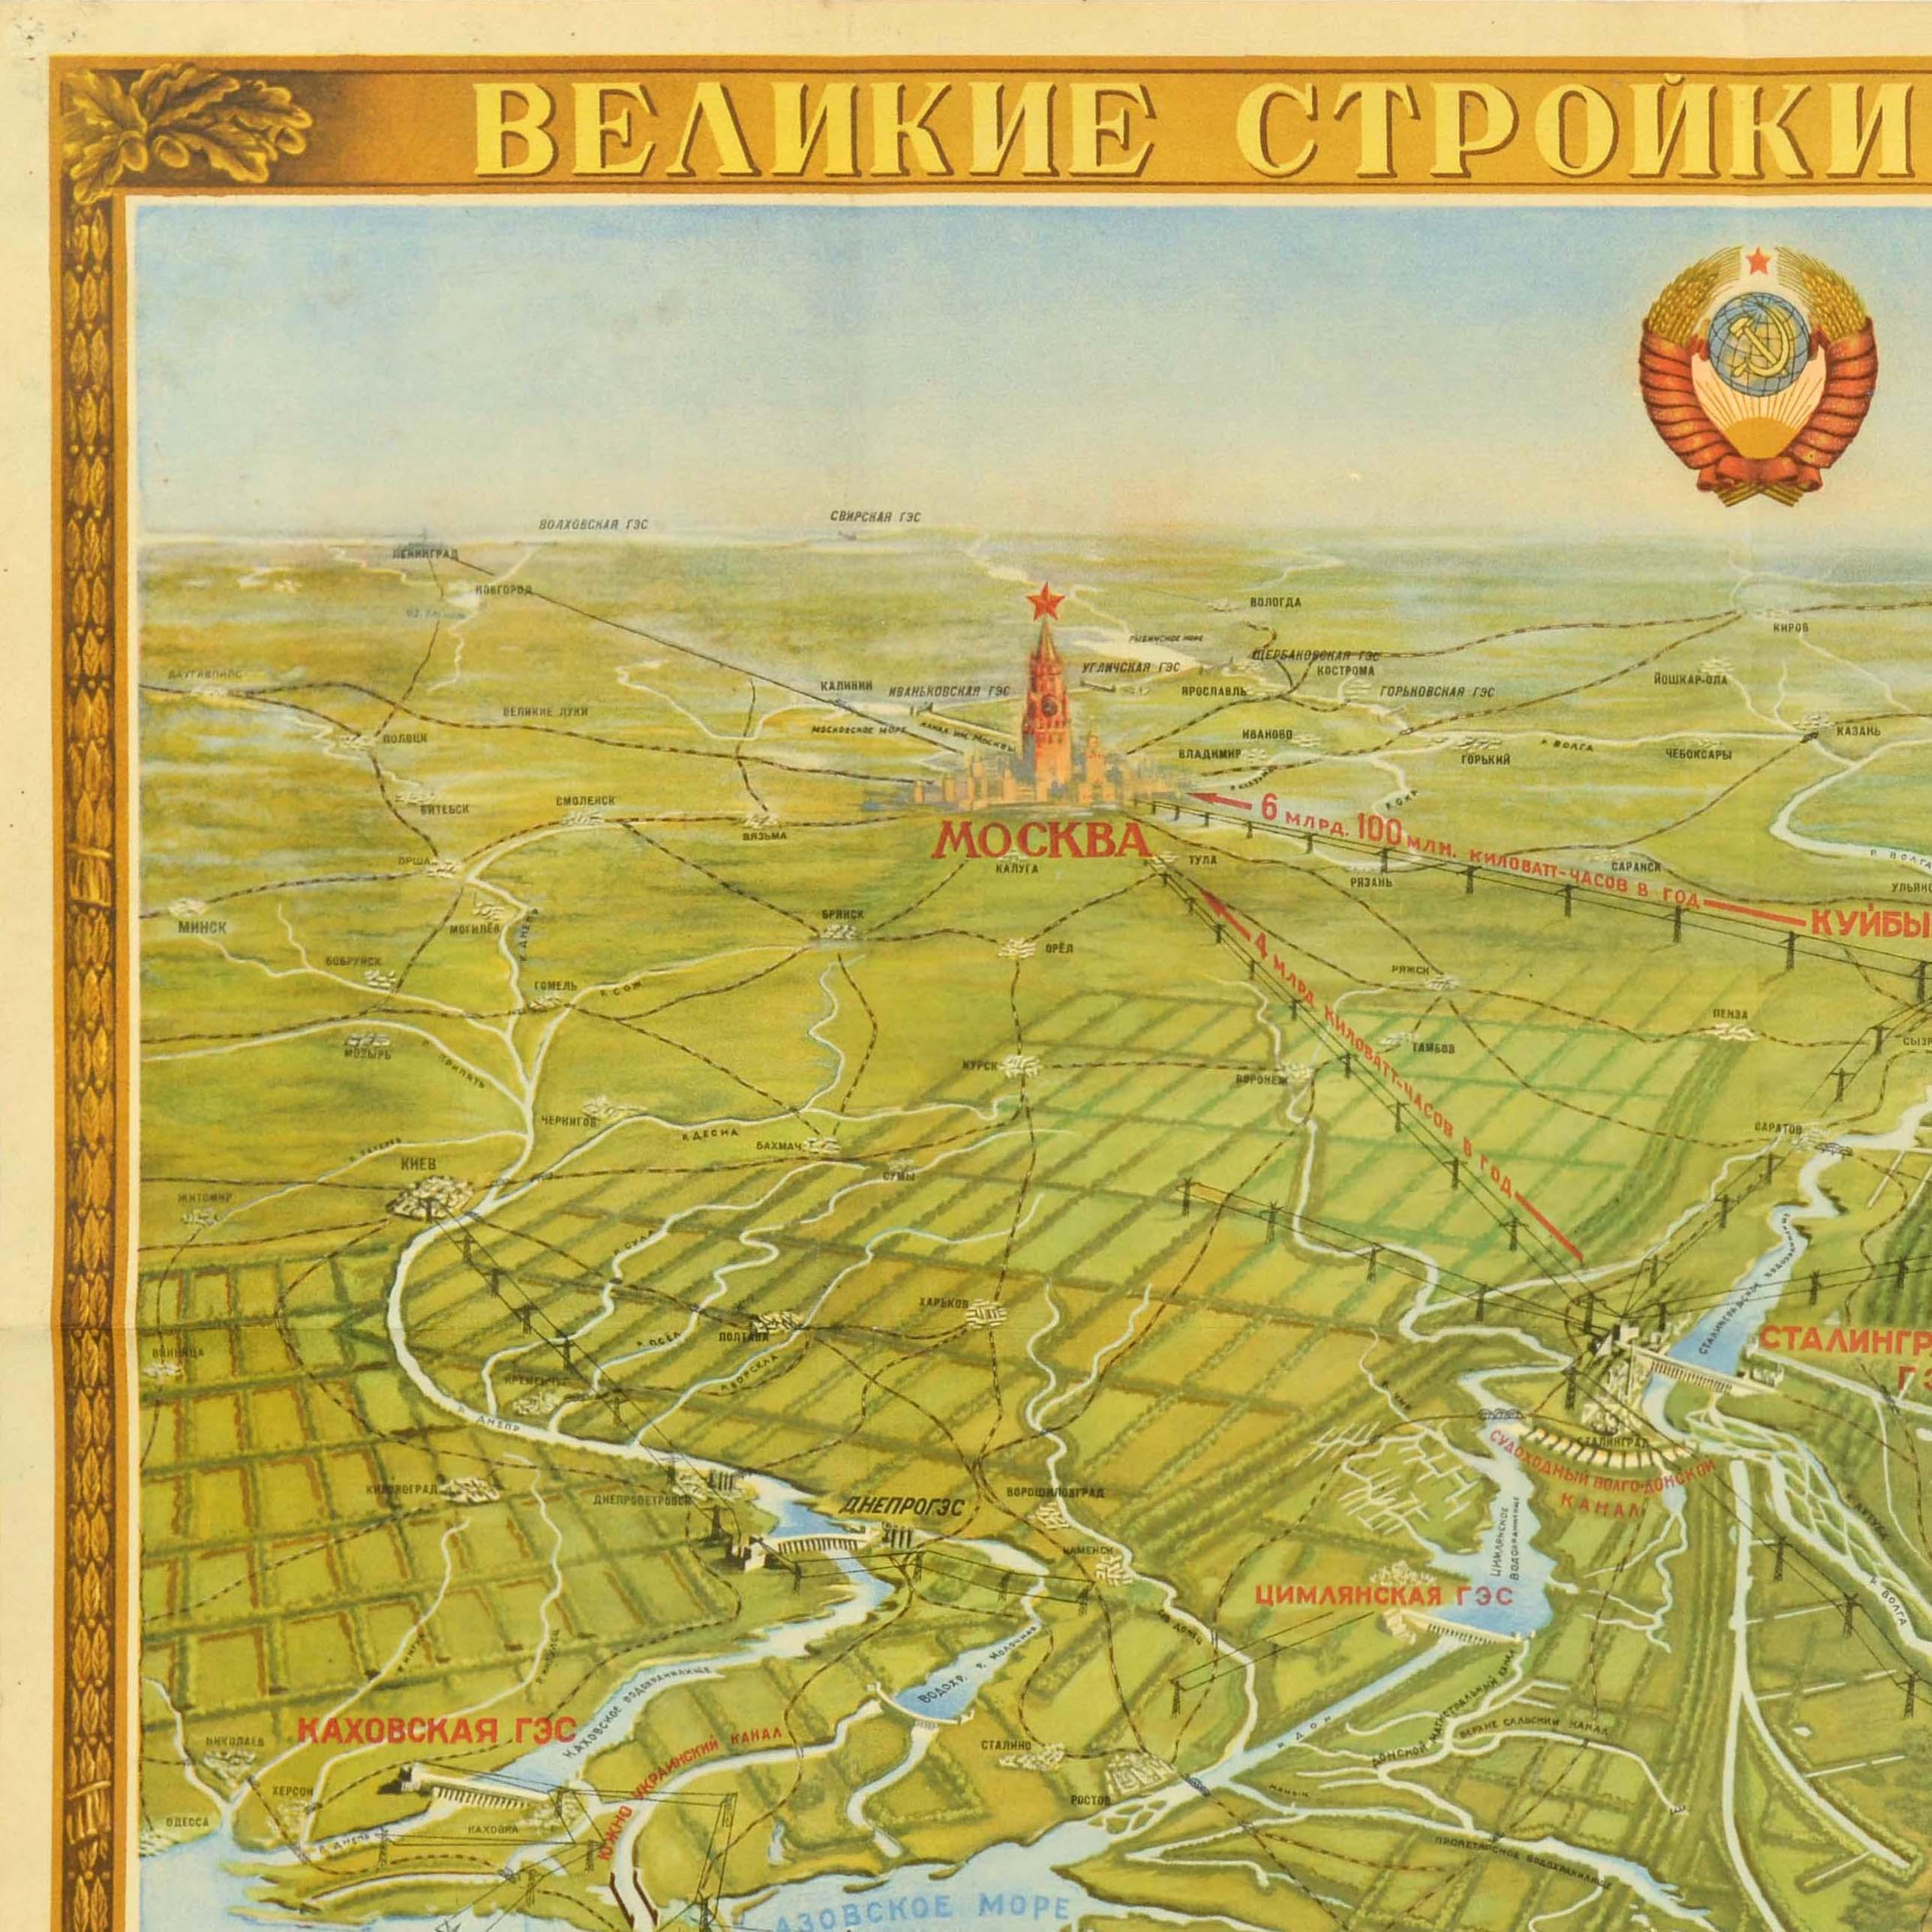 Original vintage Soviet propaganda poster - Great Buildings of Communism - featuring a pictorial map design with an illustration of the Moscow Kremlin and skyscrapers in the capital city linked by power lines to the Kuybyshev Hydroelectric Station